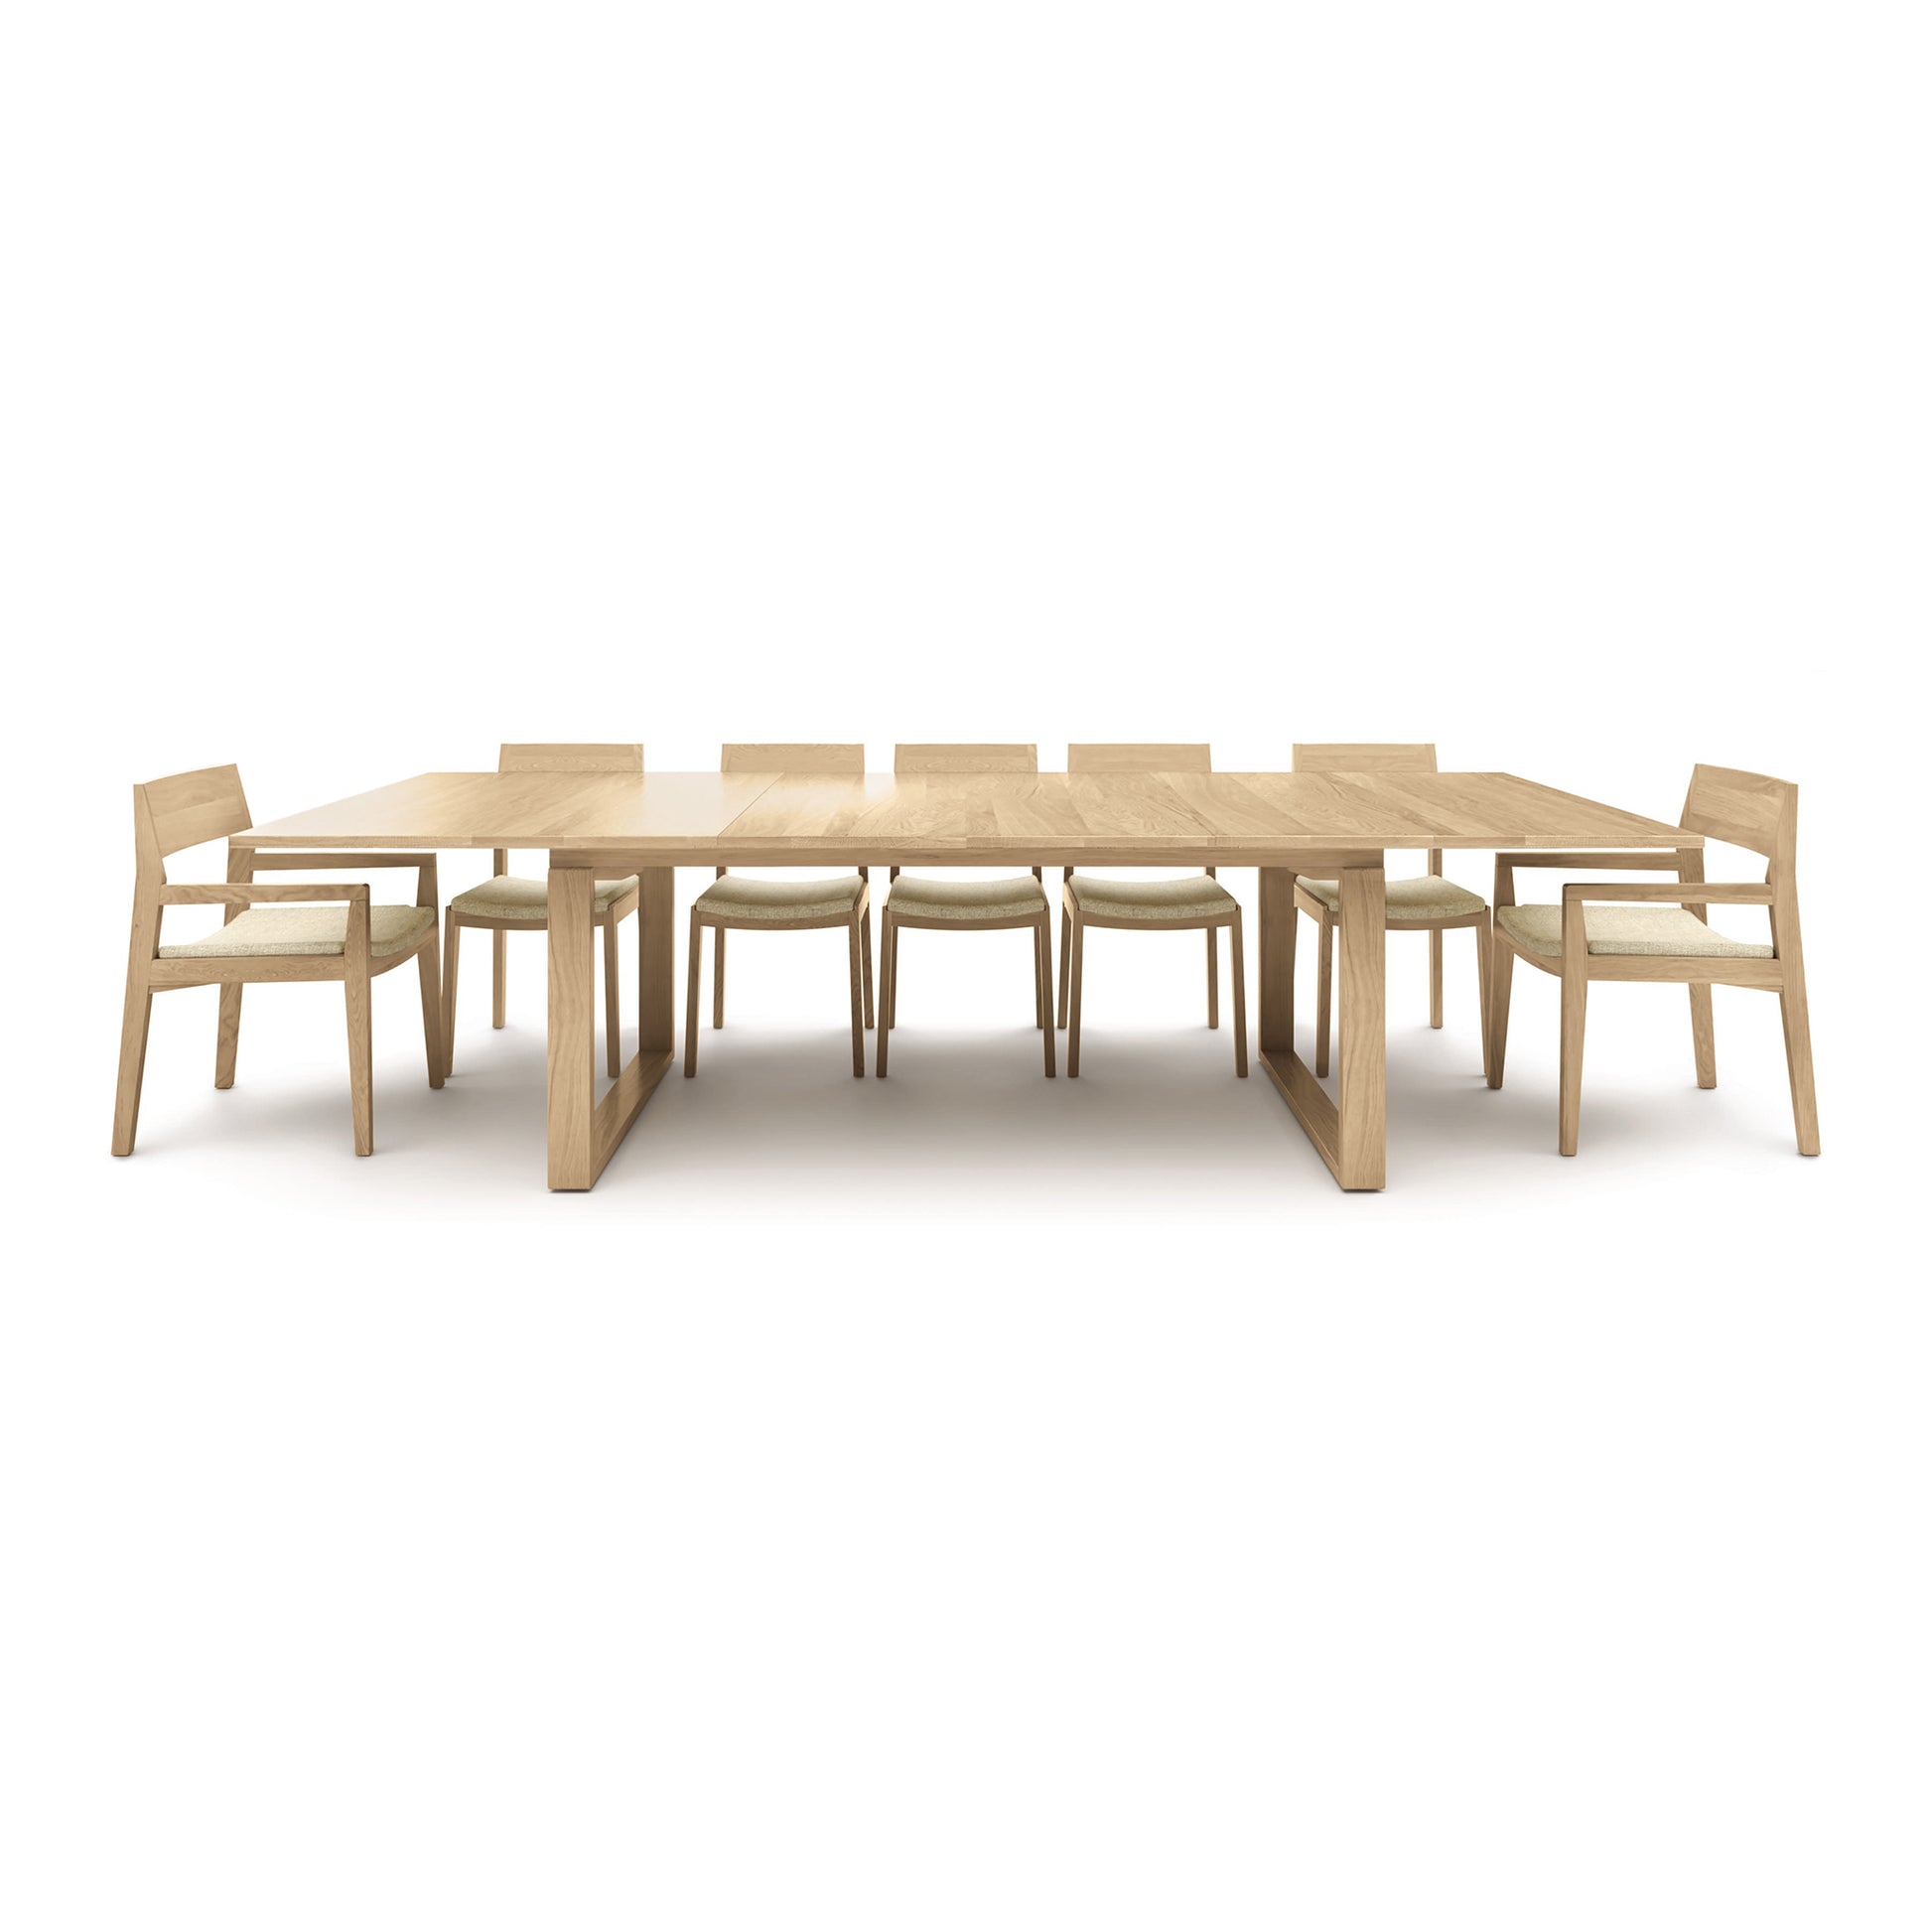 A solid oak wood Copeland Furniture Iso Oak Extension Dining Table with eight matching chairs set on a white background, perfect for the modern home.